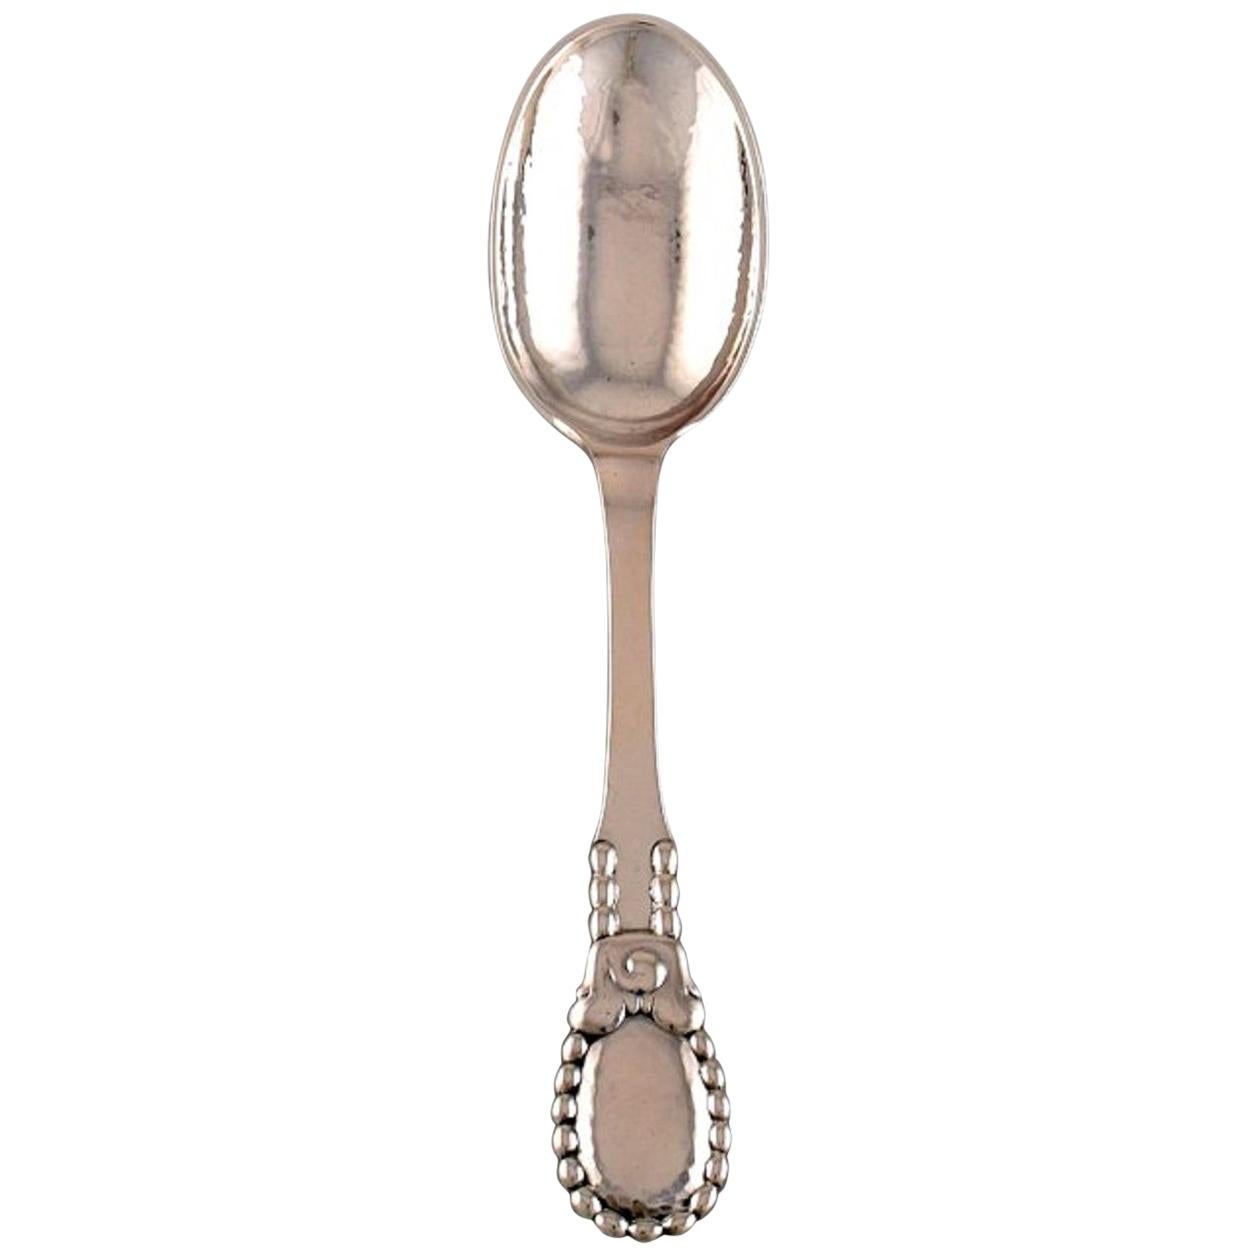 Evald Nielsen Number 13 Large Tablespoon in Hammered Silver, 1920's For Sale